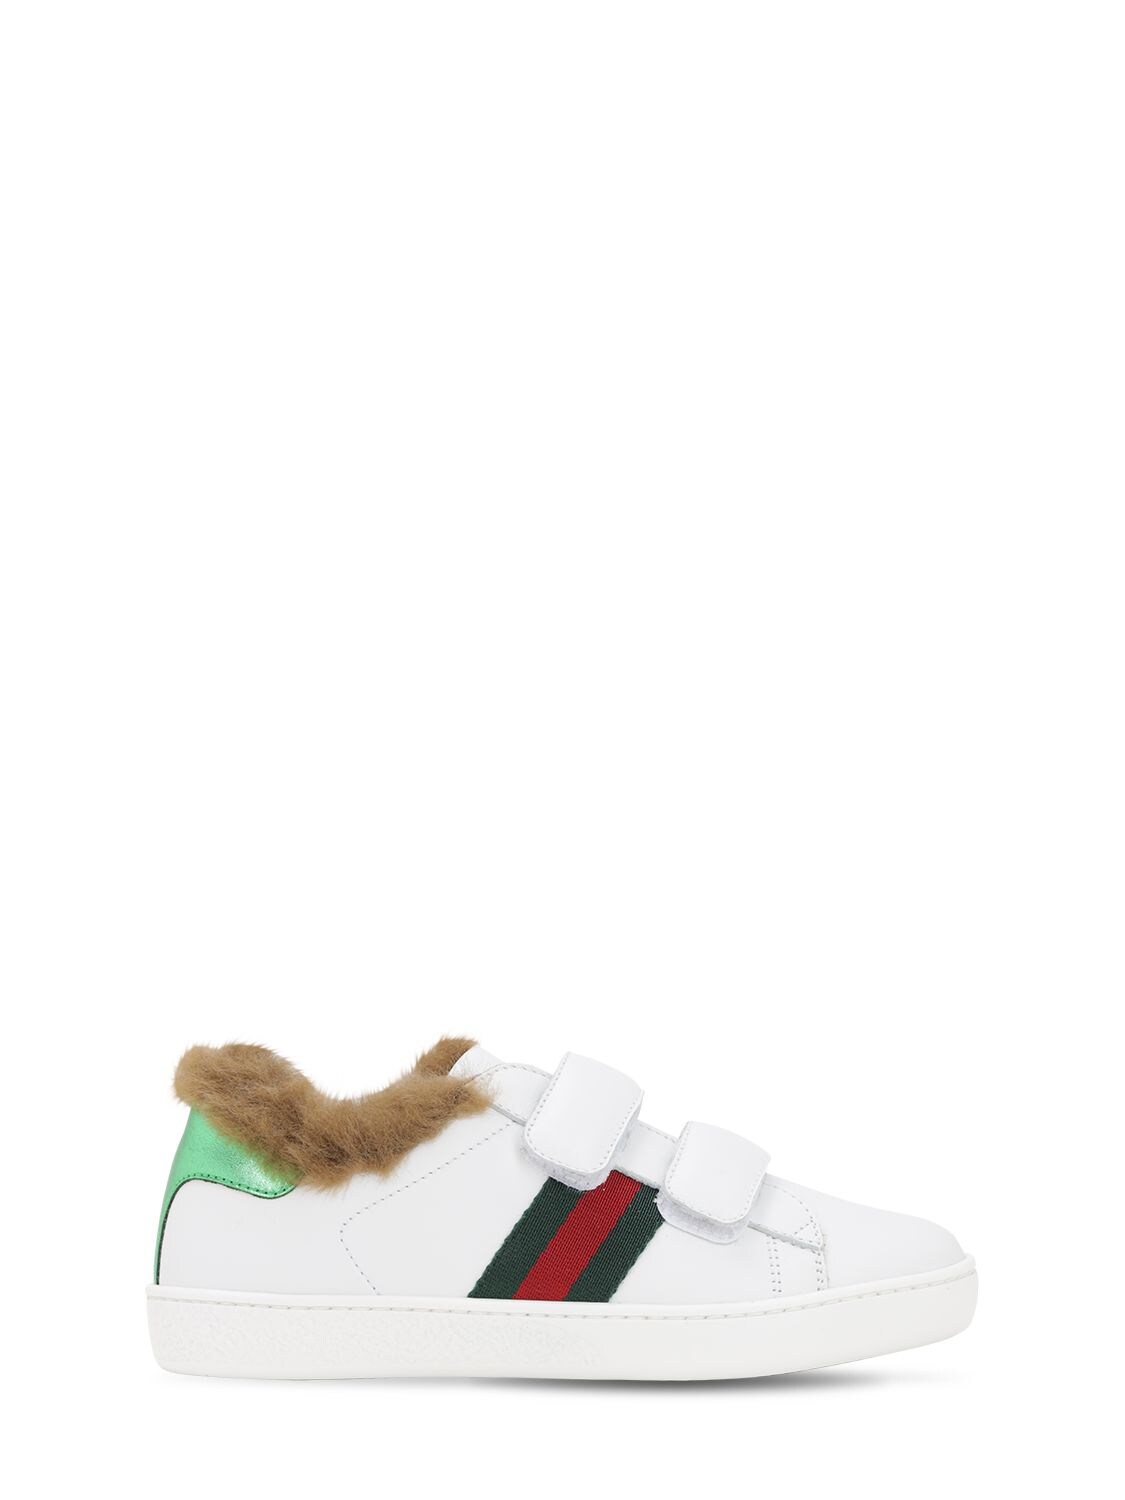 GUCCI LEATHER & FAUX FUR STRAP trainers,70IFHB013-OTA2NW2